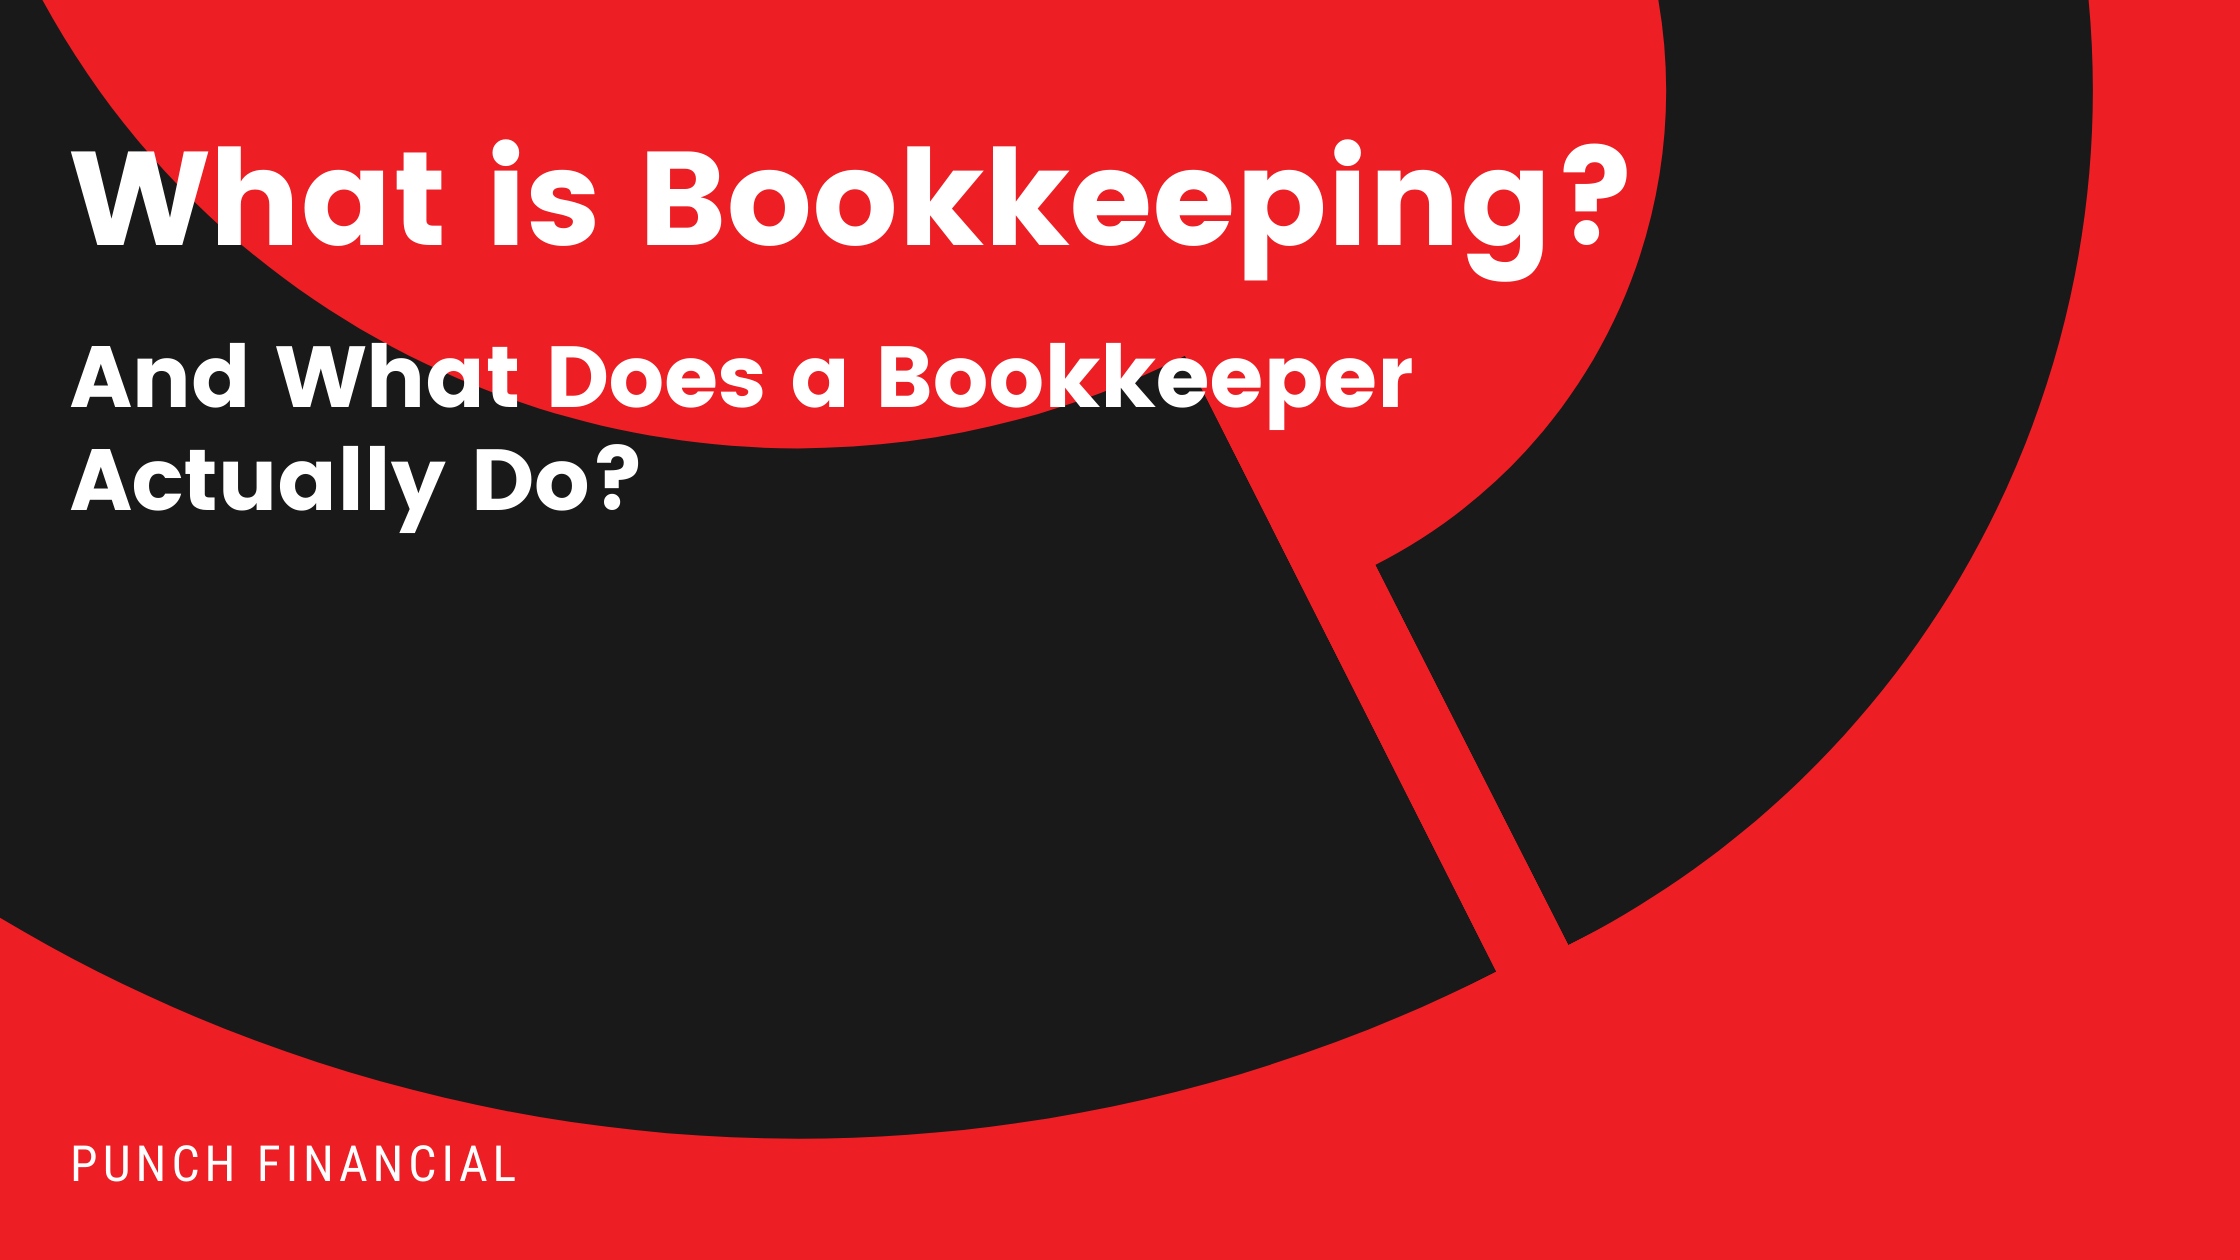 What is Bookkeeping